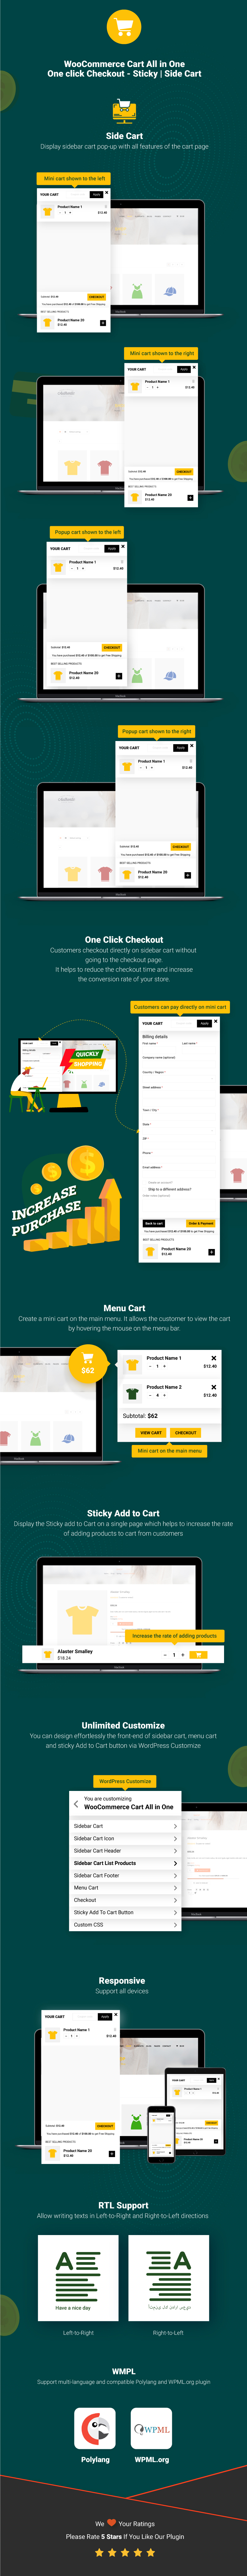 WooCommerce Cart All in One - One click Checkout - Sticky|Side Cart - 6